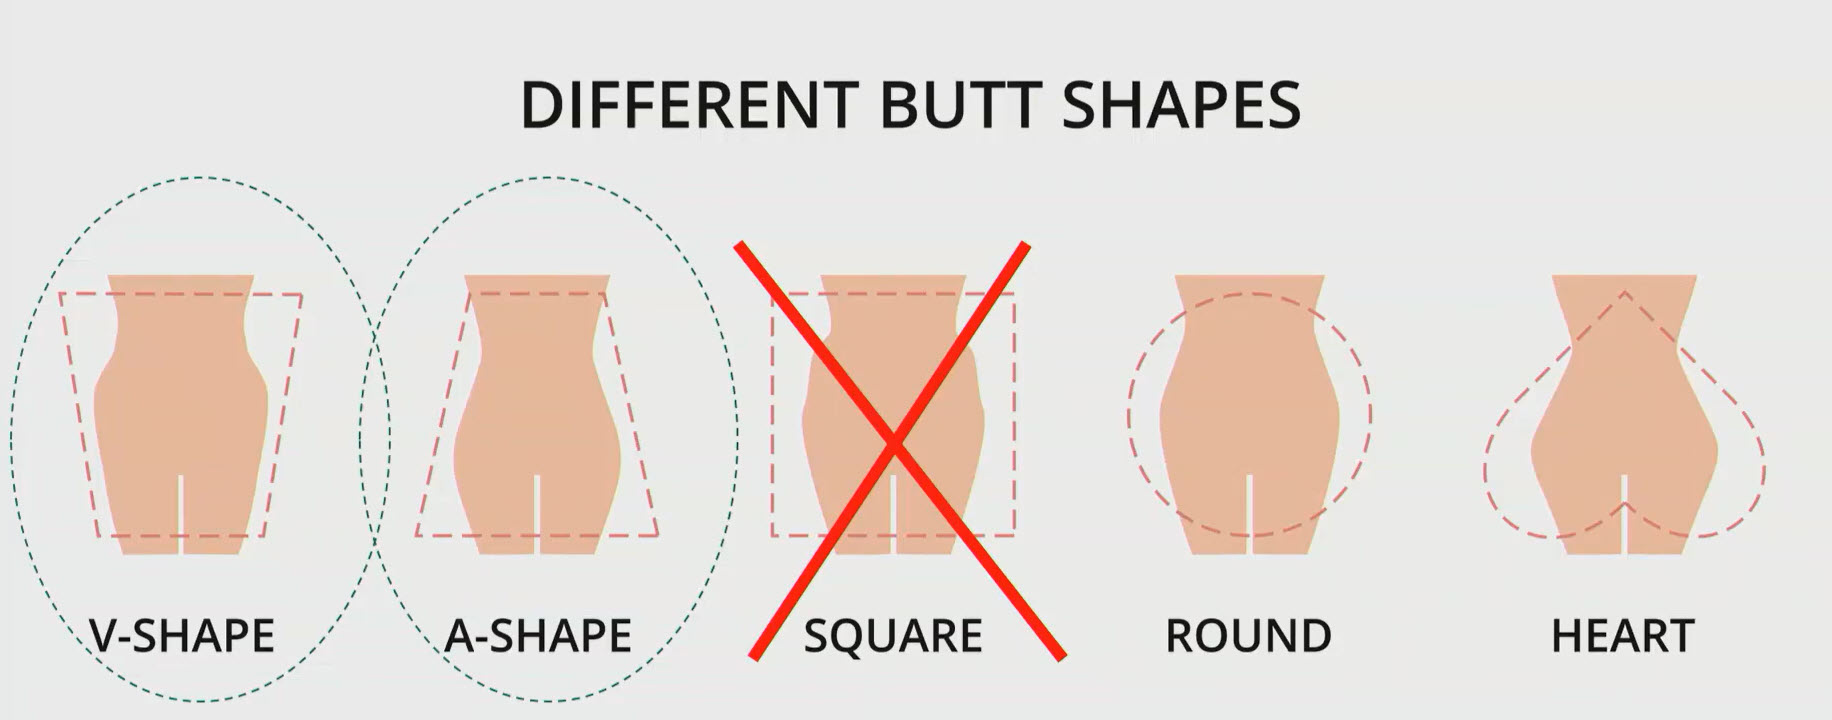 Diagram including different butt shapes, V, A, square, round, & heart